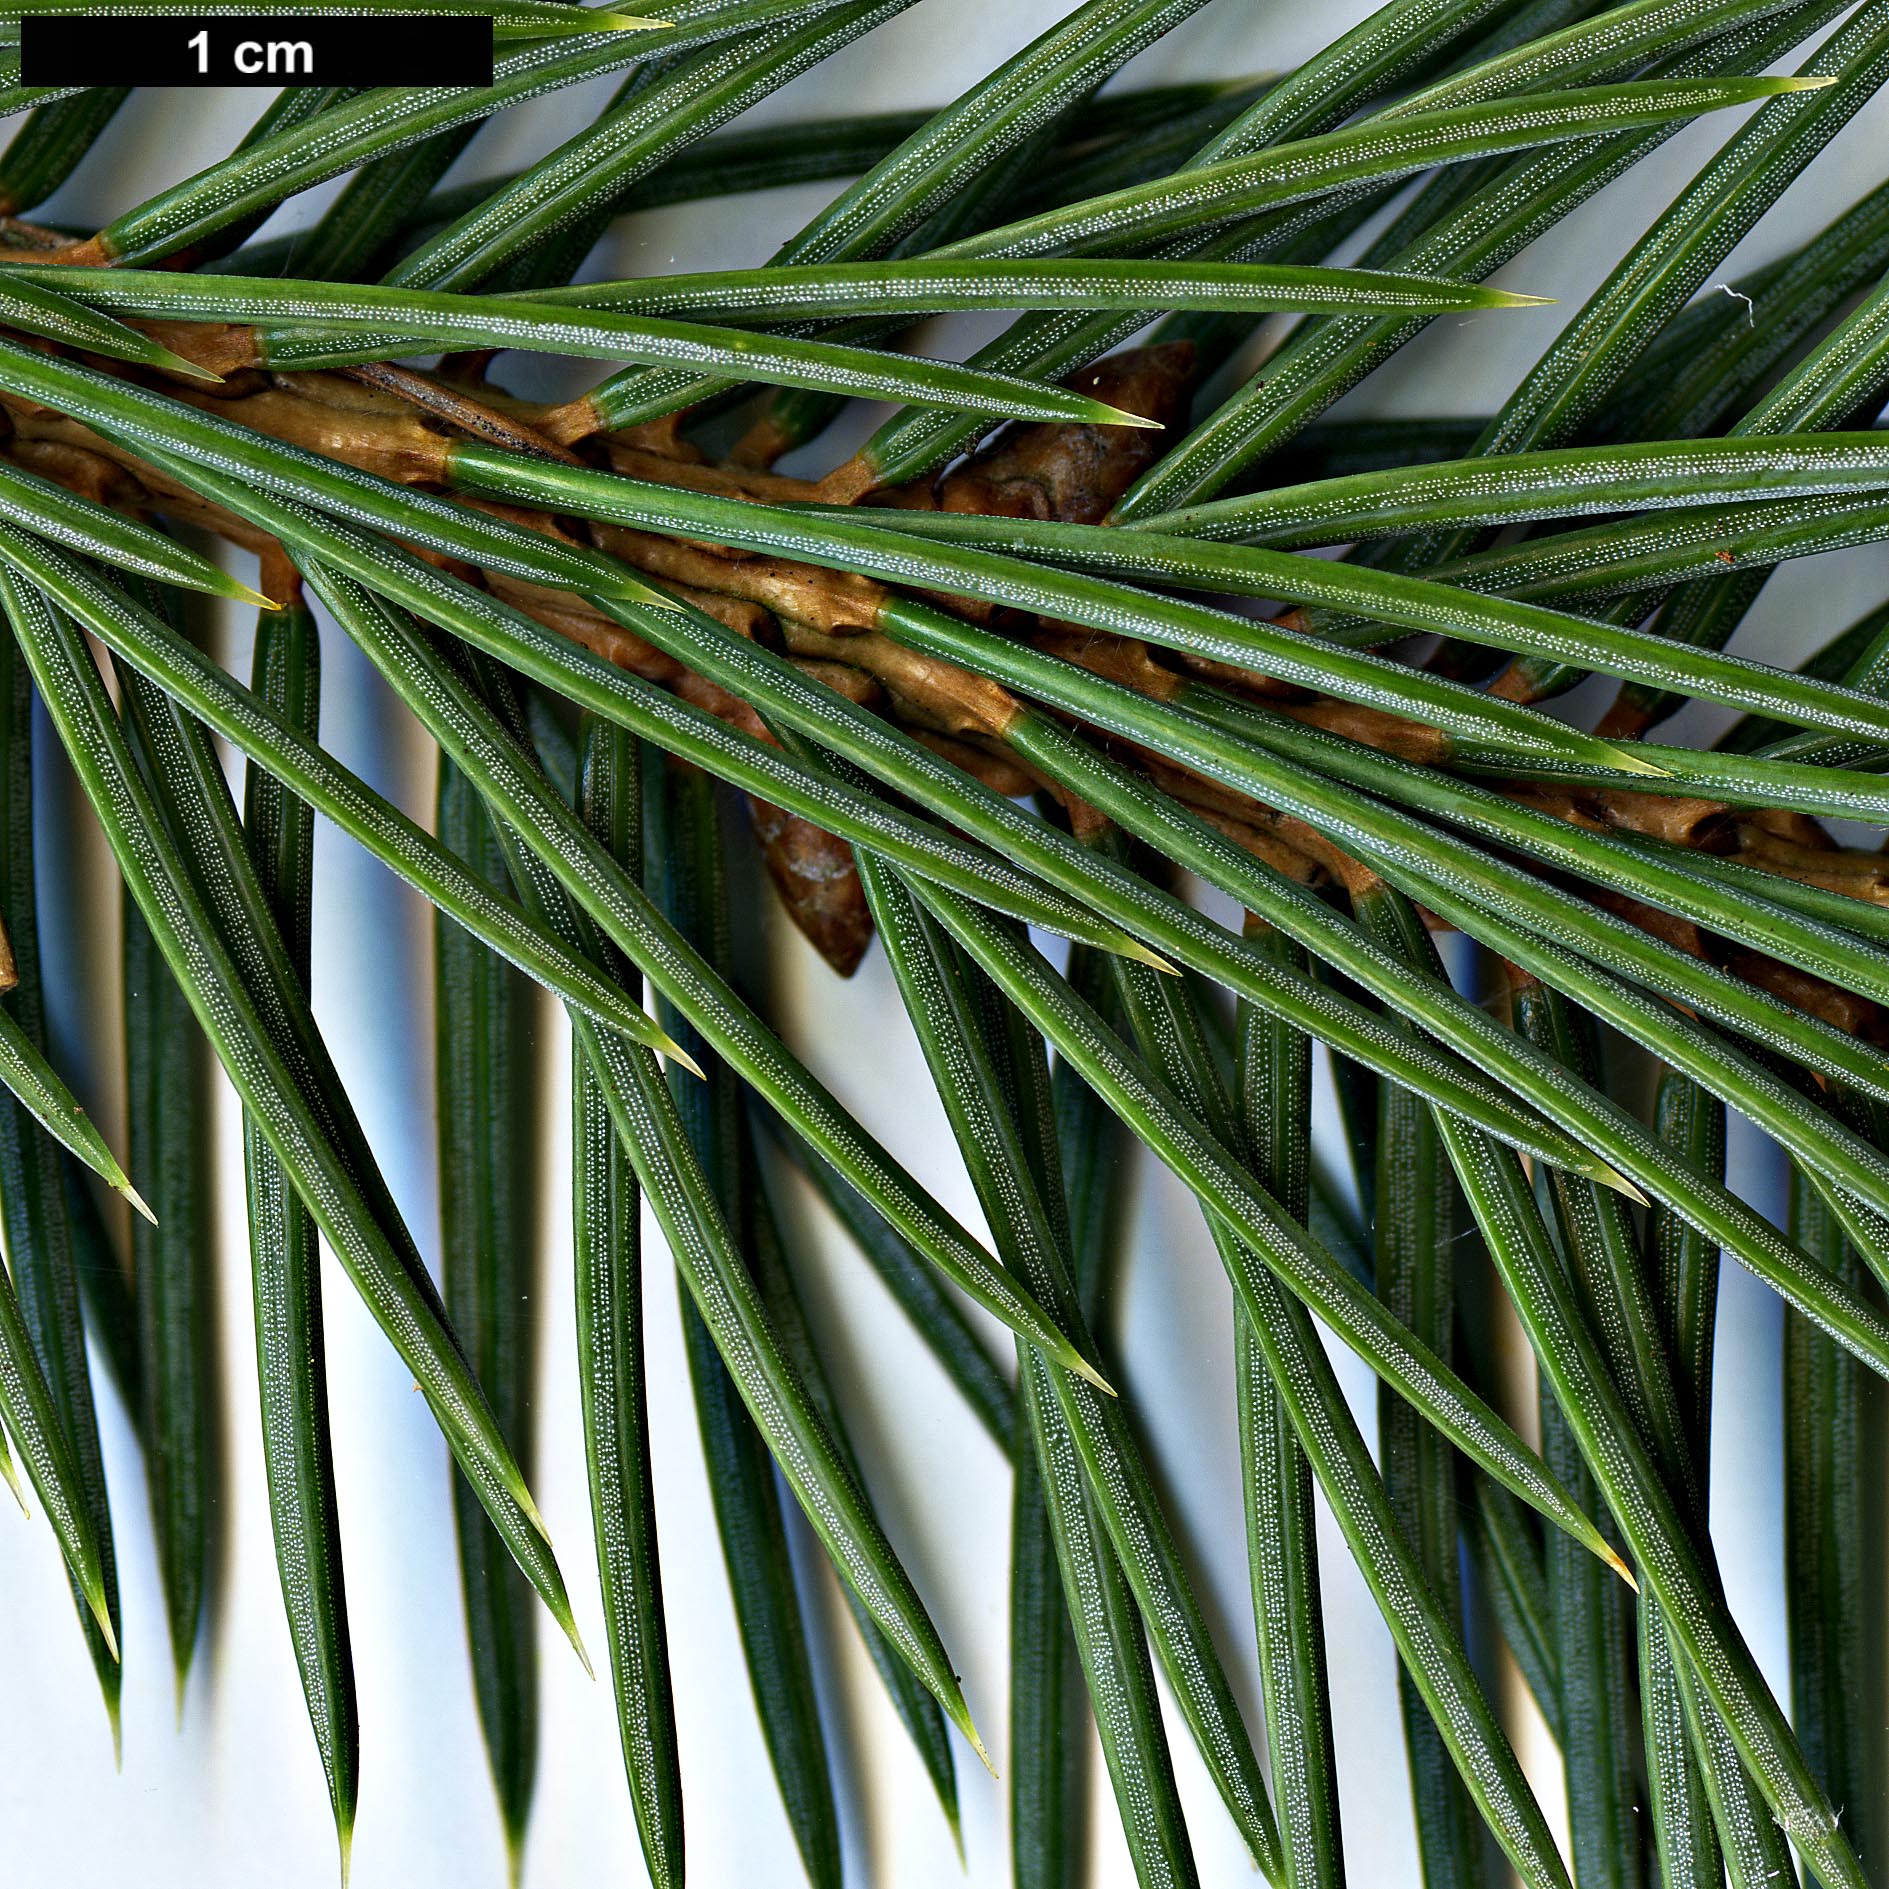 High resolution image: Family: Pinaceae - Genus: Picea - Taxon: chihuahuana